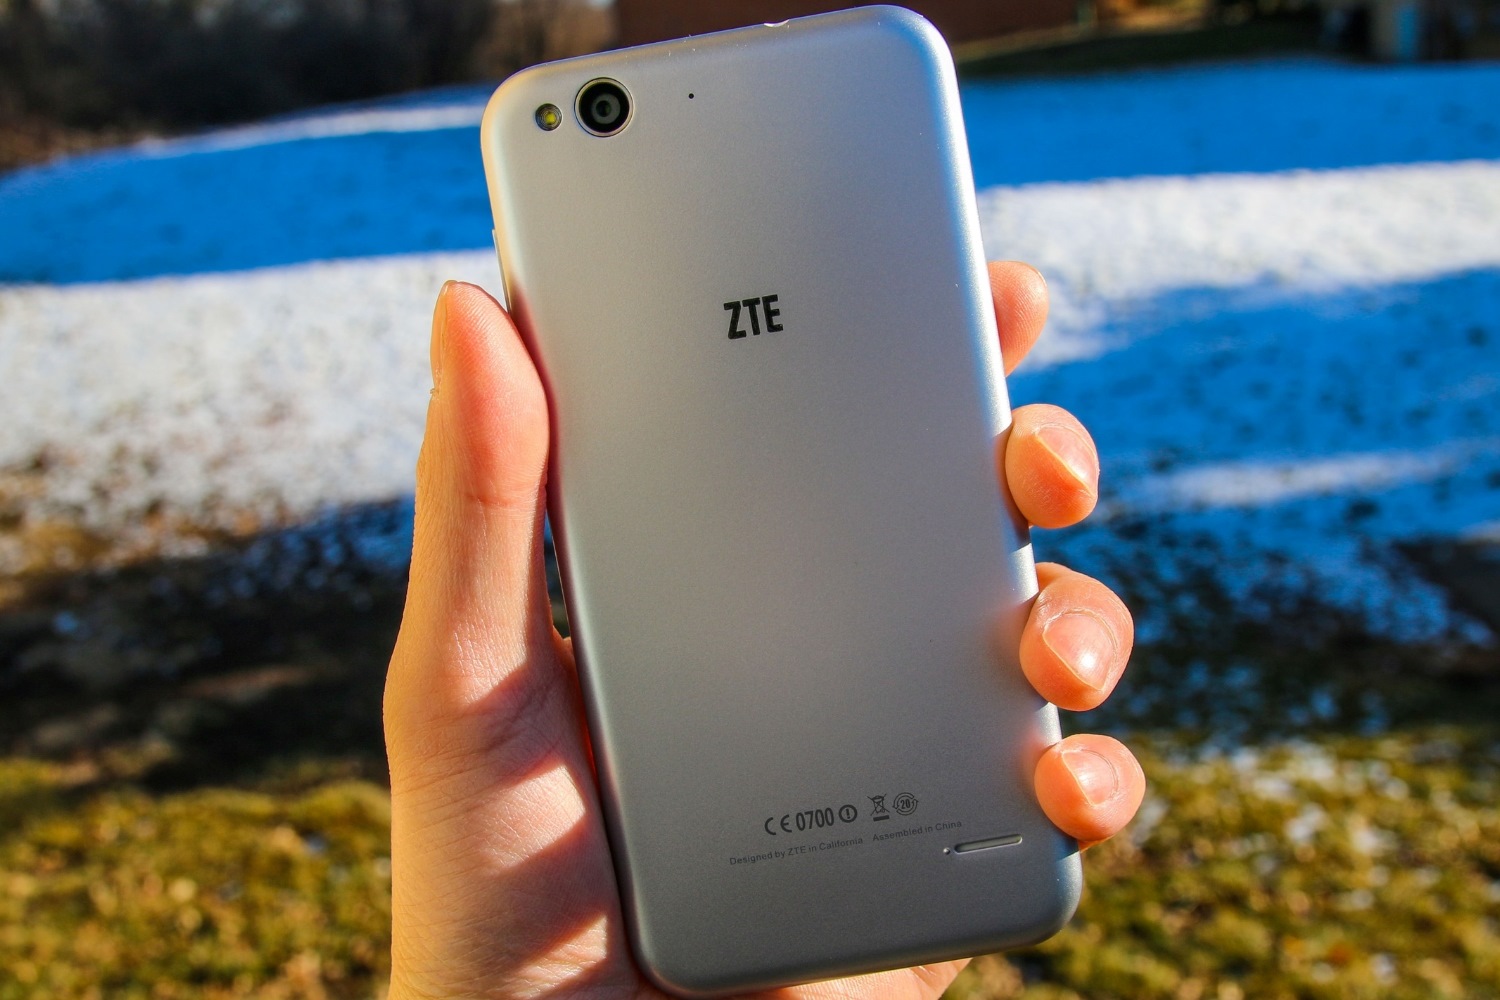 Inserting SIM Card In ZTE Phone: Step-by-Step Guide